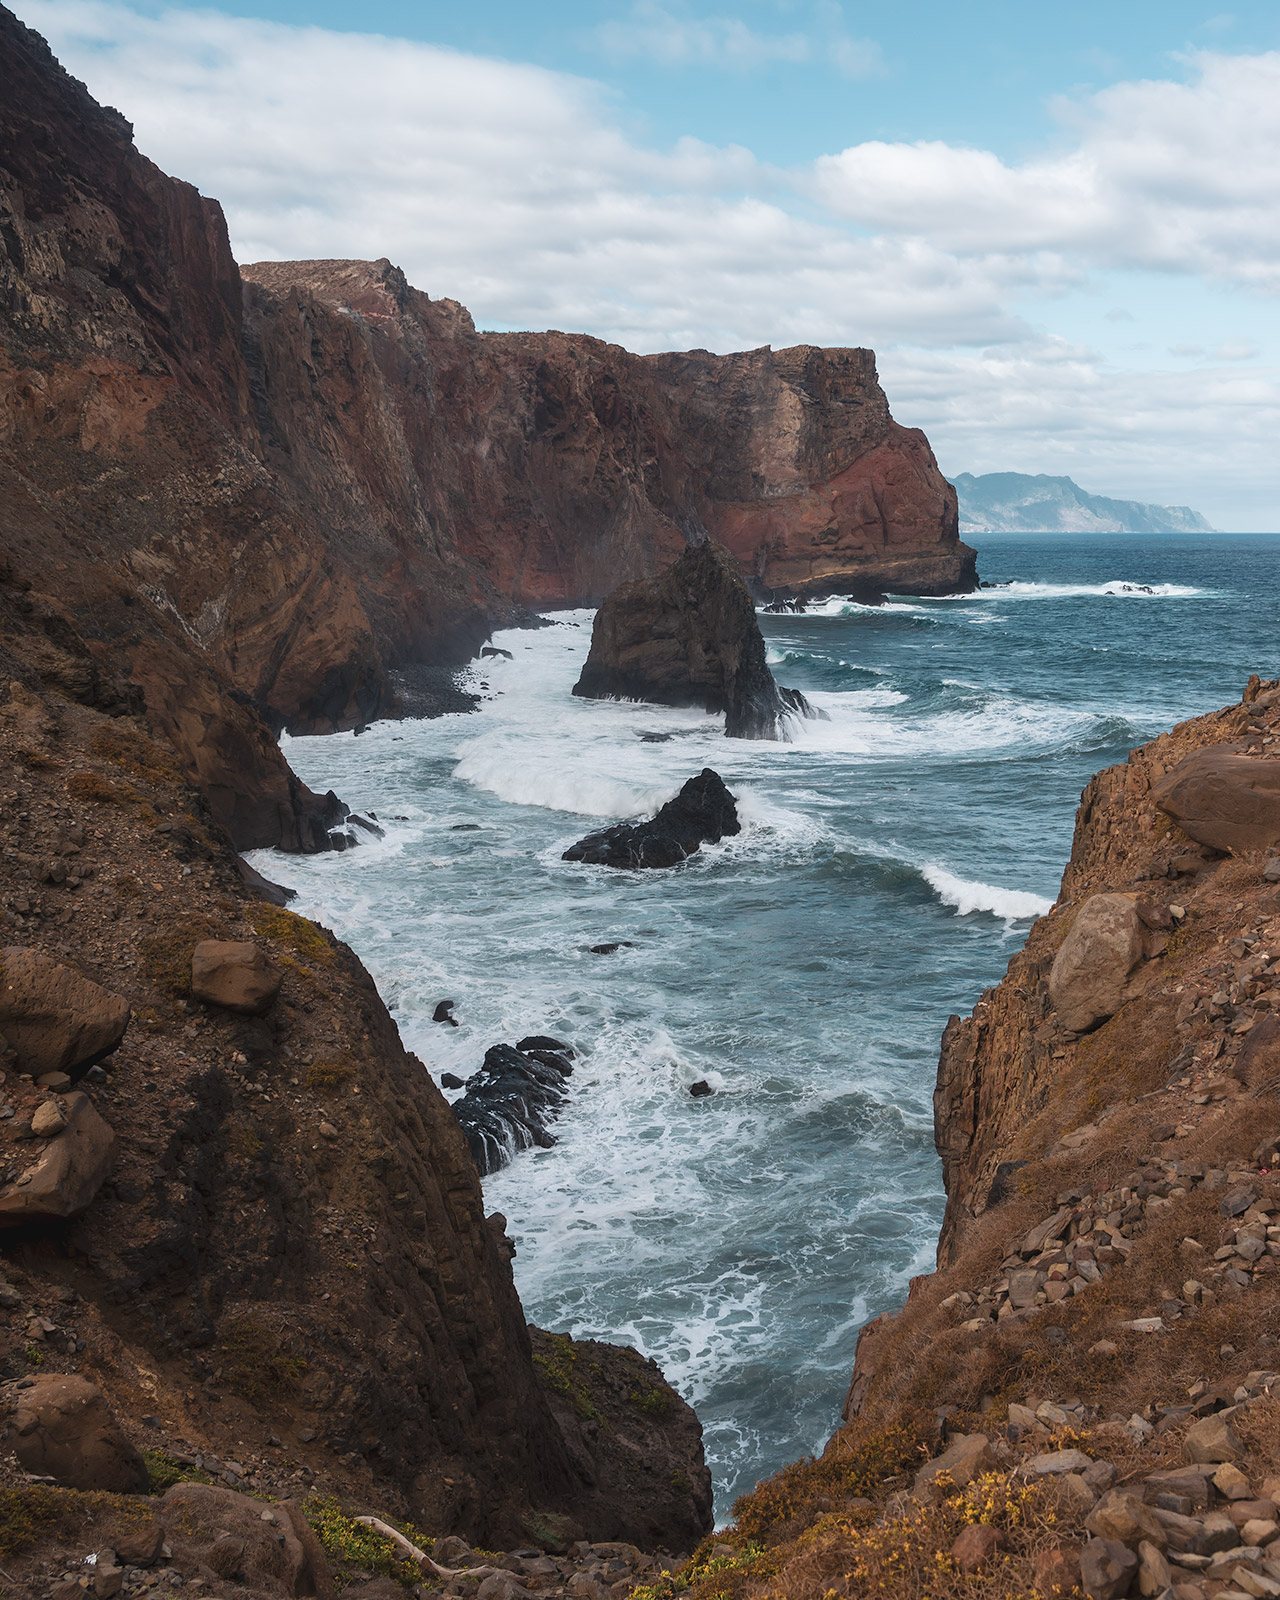 Ponta de São Lourenço is all about rugged landscapes, stunning sceneries, and interesting rock formations.